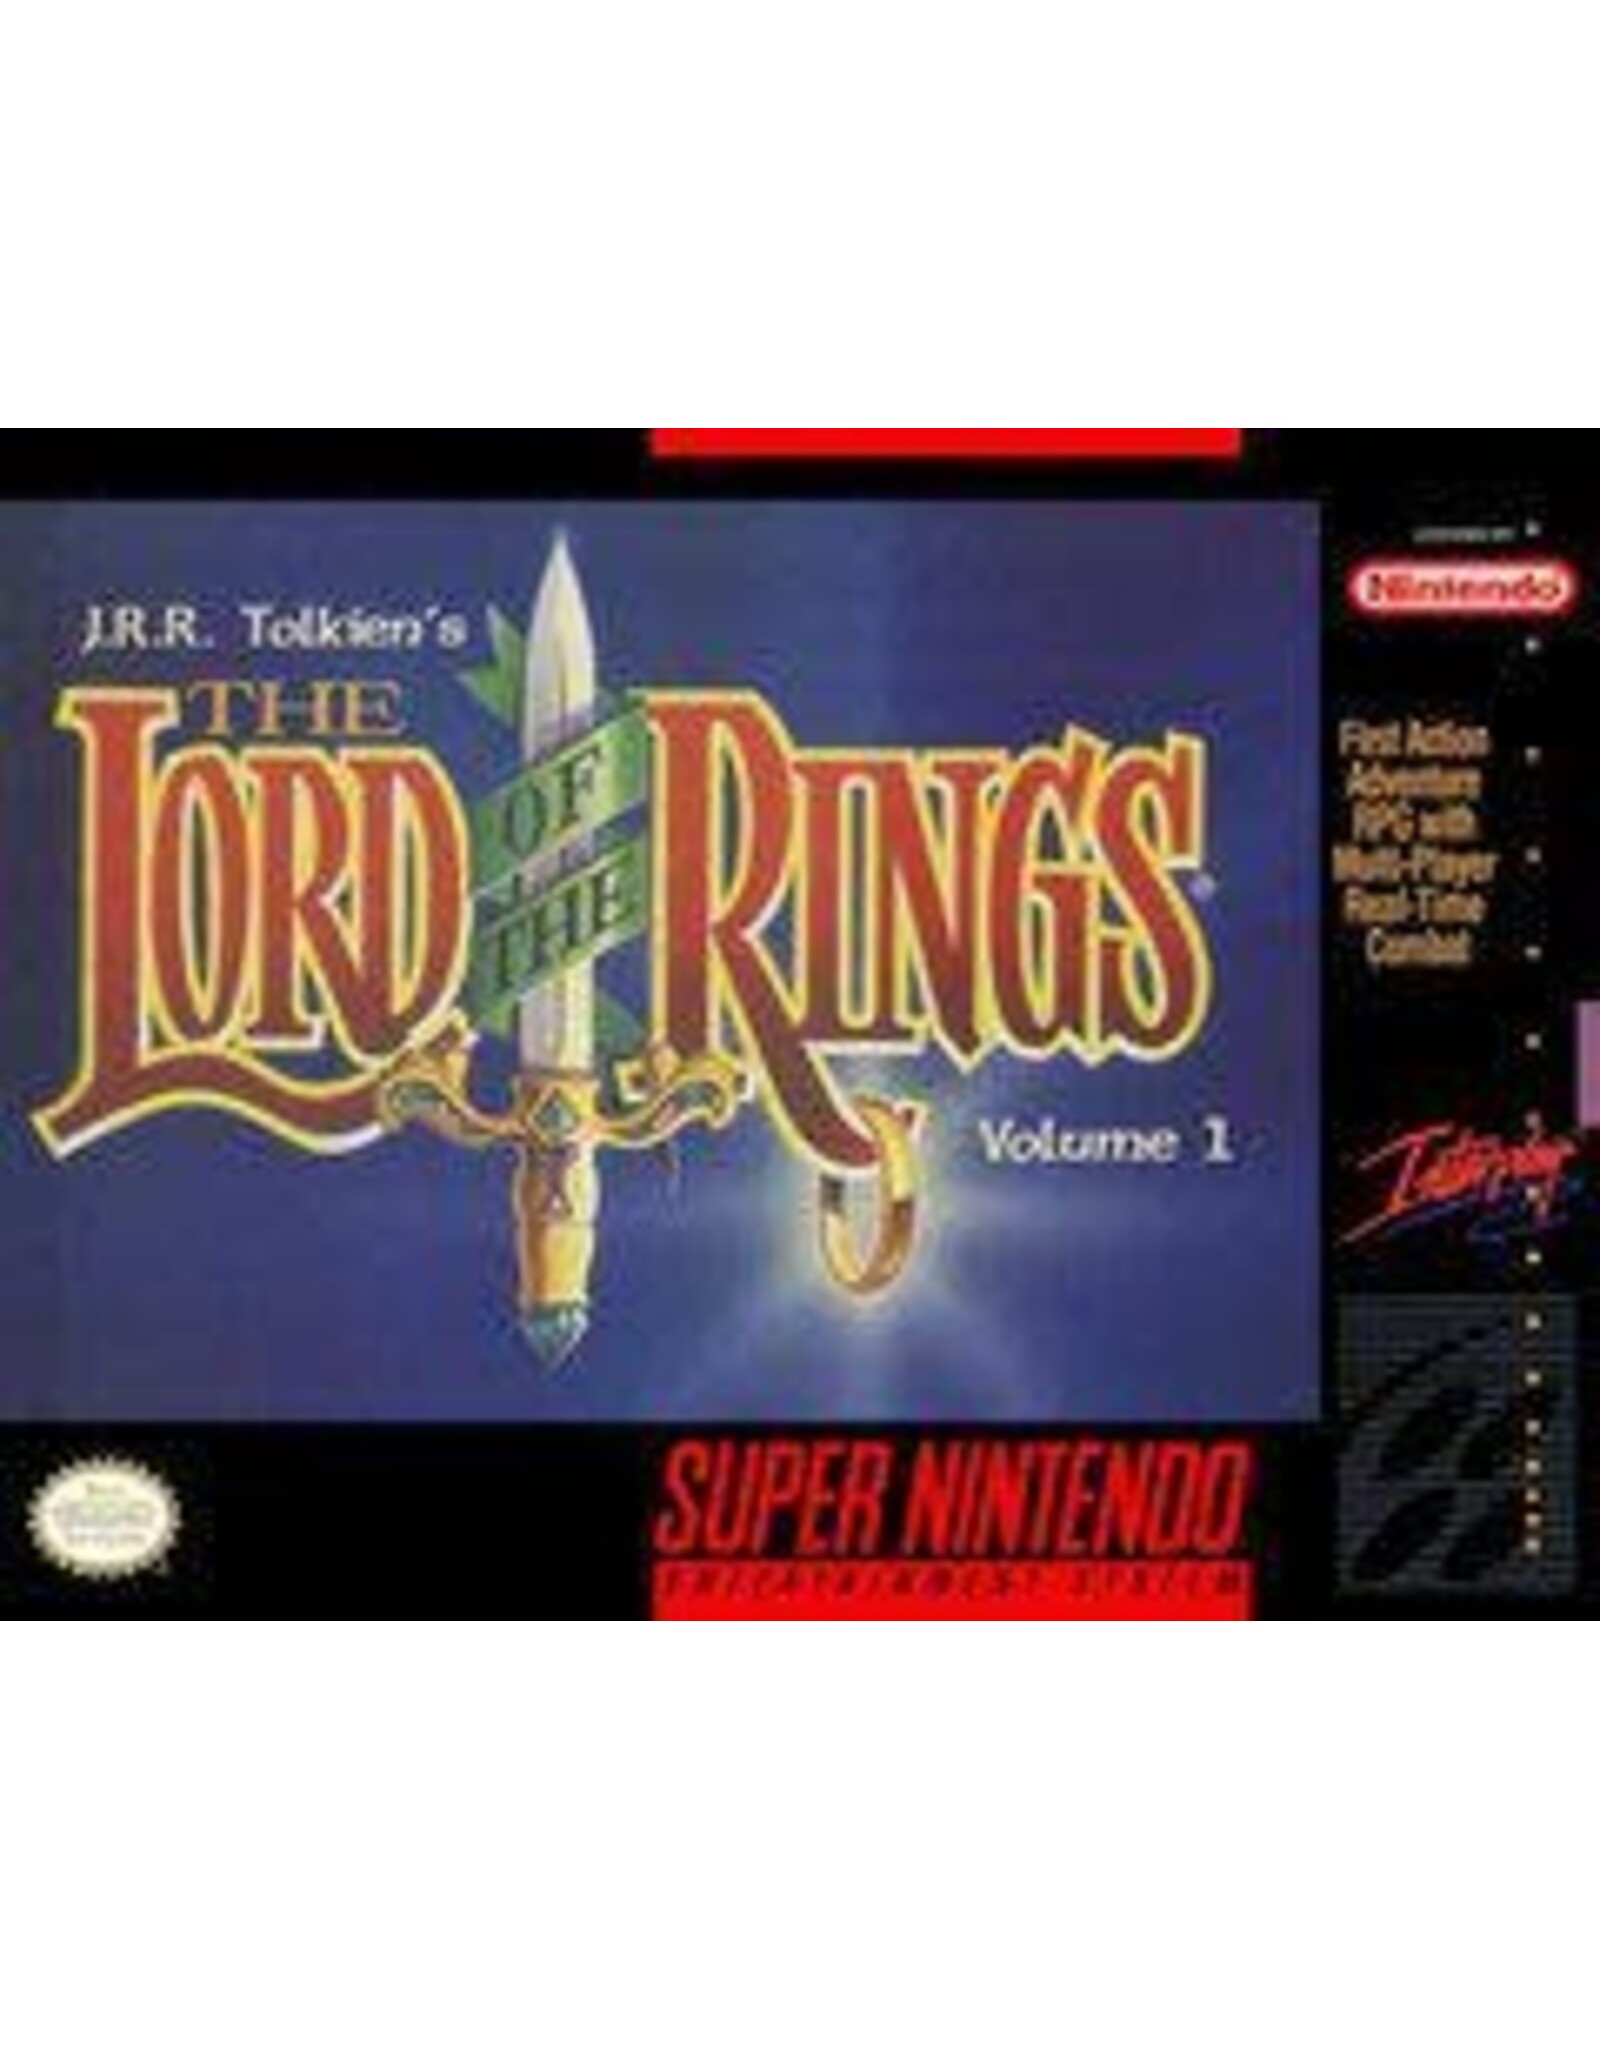 Super Nintendo Lord of the Rings (Boxed, No Manual)